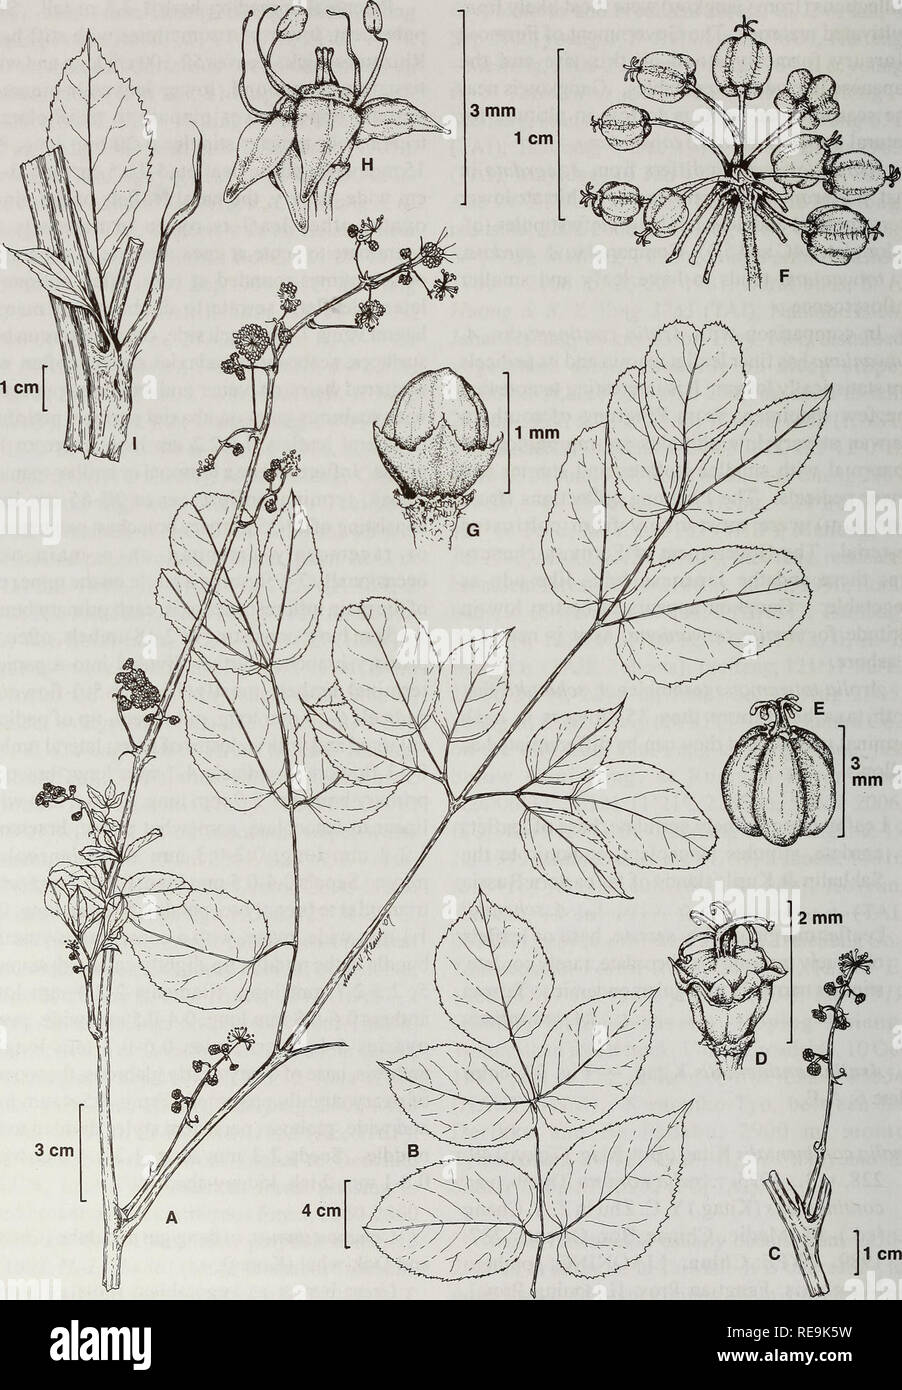 . Contributions from the United States National Herbarium. Botany. 84 Systematics of Aralia. Fig. 27. Aralia continentalis Kitag. A. Habit showing leaves and inflorescences. B. Part of a lower leaf showing the terminal pinna. C. Axillary inflorescence. D. Flower after anthesis. E. Young fruit. F. Umbel with fruits. G. Floral buds. H. Flower. I. Leaf-like stipule (A, C &amp; G - Ye 2002, MO; B, D &amp; H - Biao 1104, MO; E &amp; F - Wang 60812, A; I - Ching 2957, A).. Please note that these images are extracted from scanned page images that may have been digitally enhanced for readability - col Stock Photo